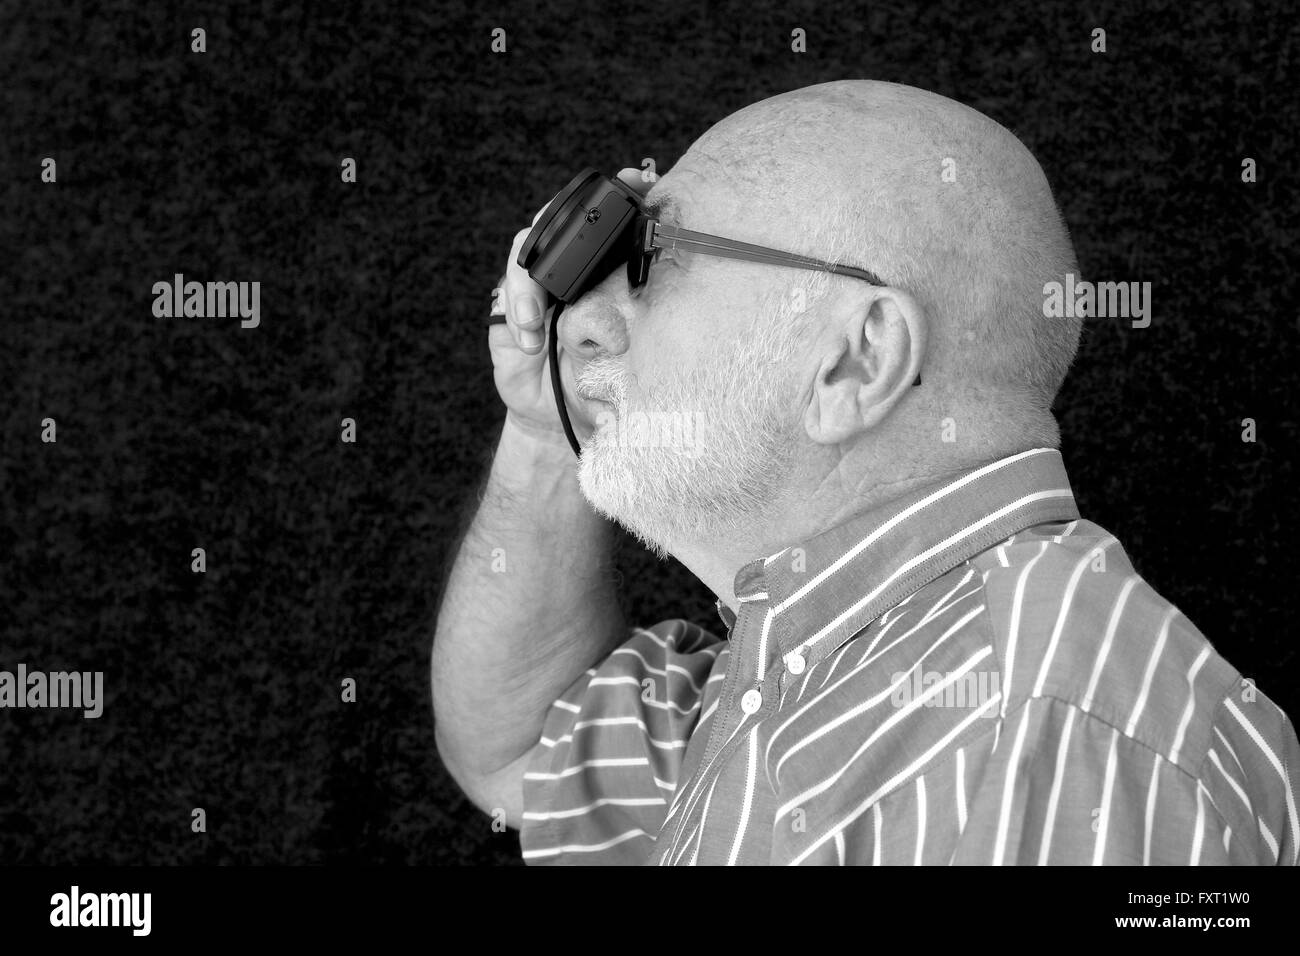 An old man taking a photograph in black and white. Stock Photo